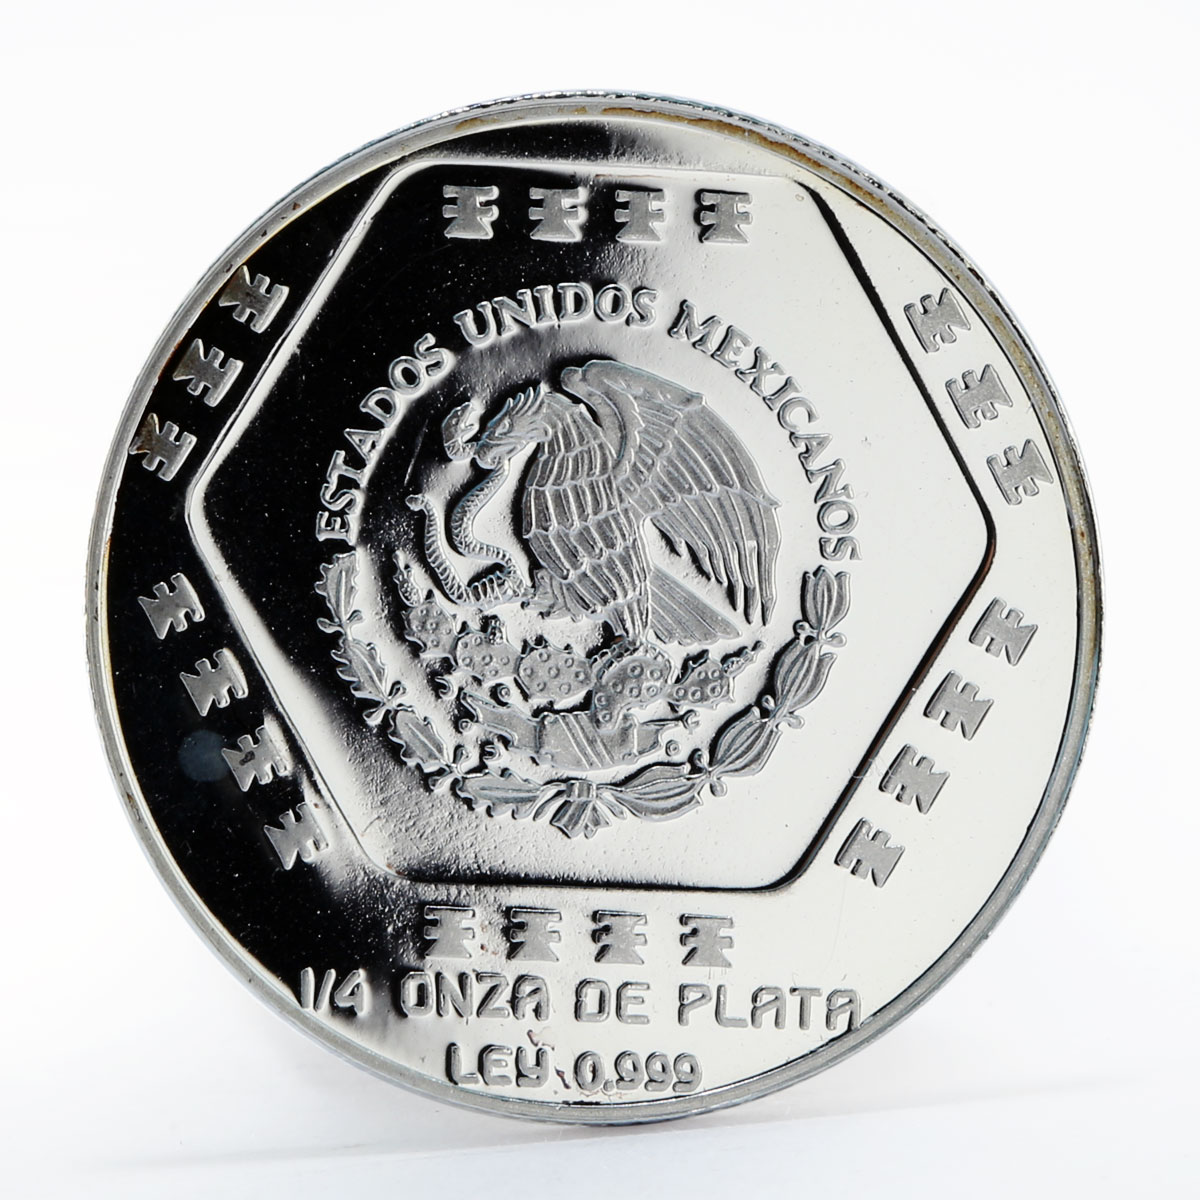 Mexico 1 peso Chaac Mool silver proof coin 1994